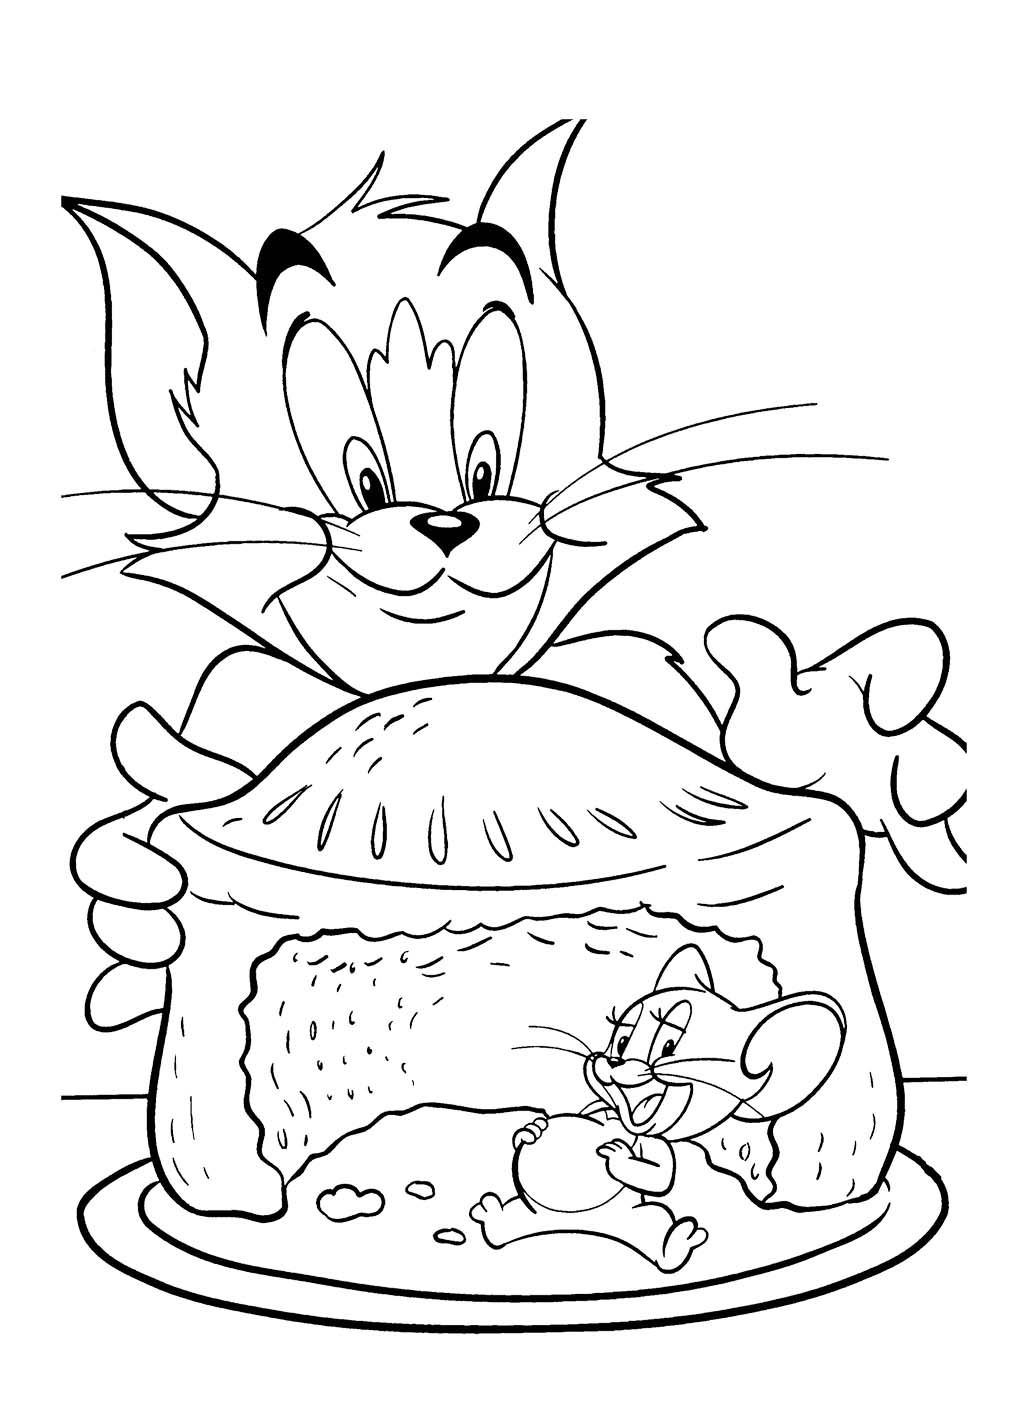 Tom And Jerry Eating A Cake Coloring Page   Free Printable ...